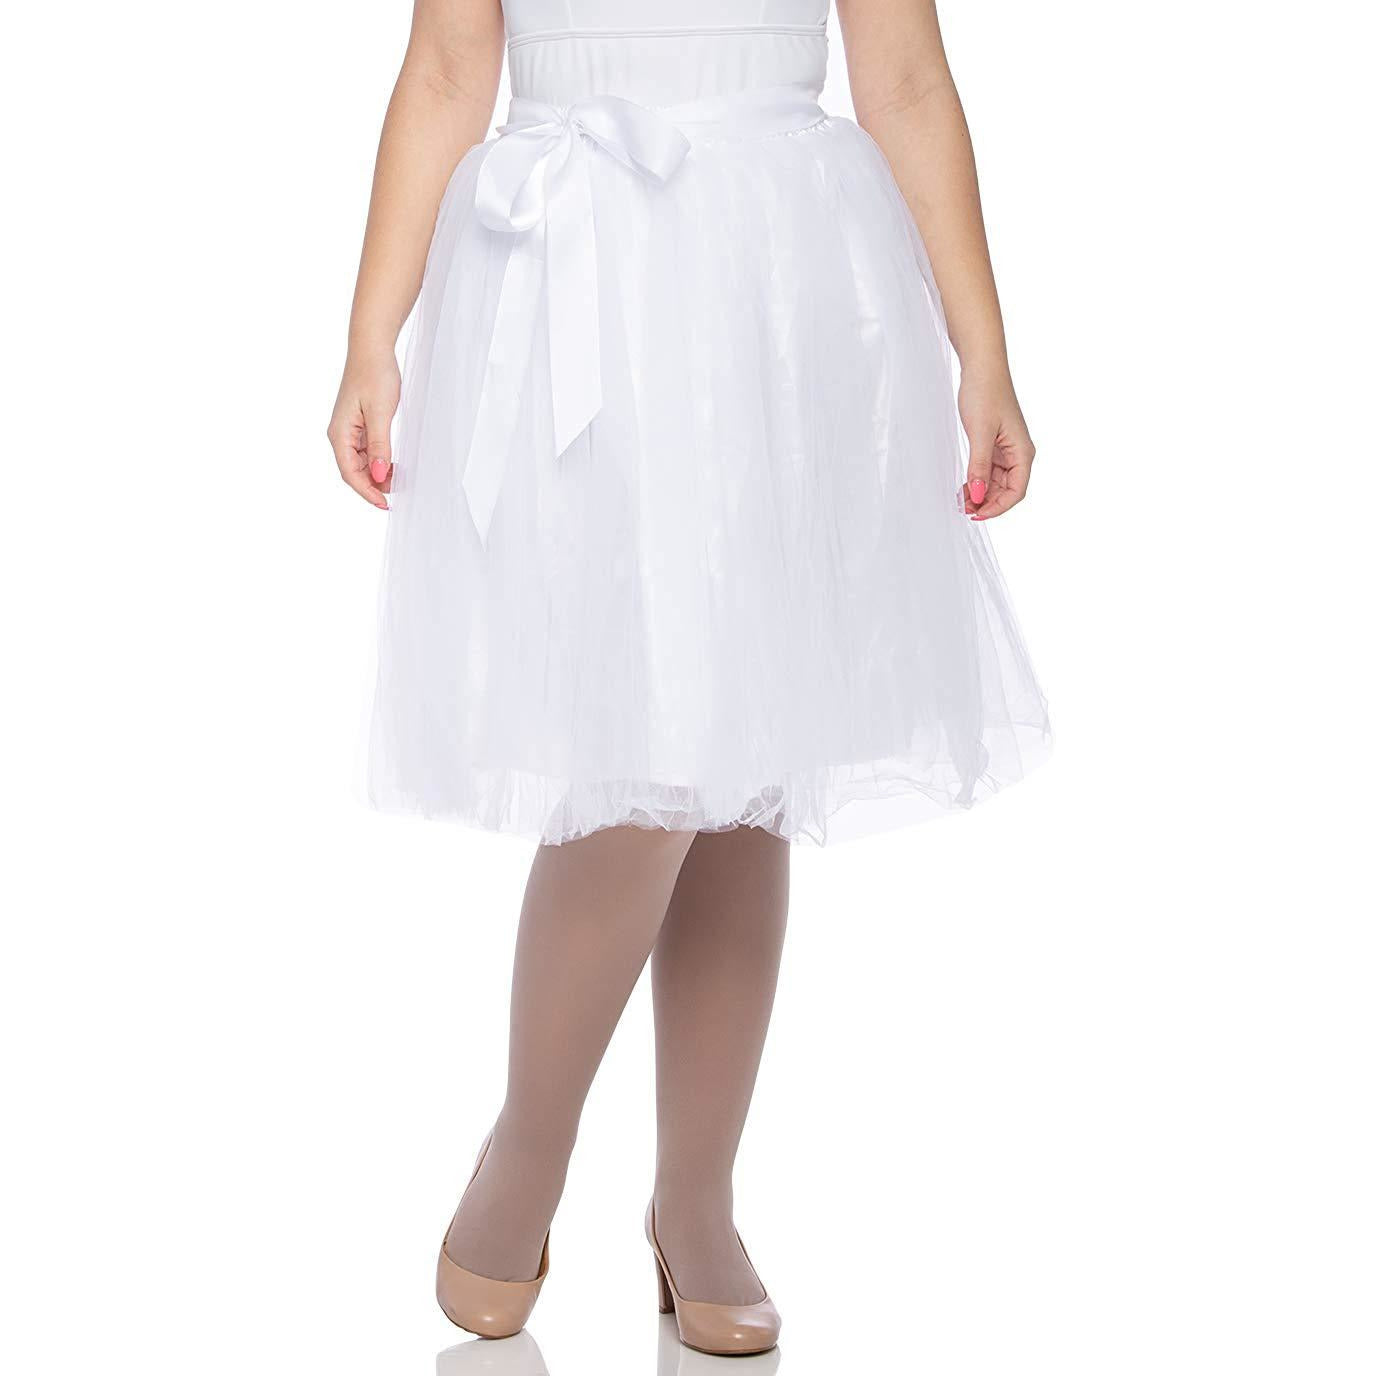 Adults & Girls A-line Knee Length Tutu Tulle Skirt - Regular and Plus Size in White